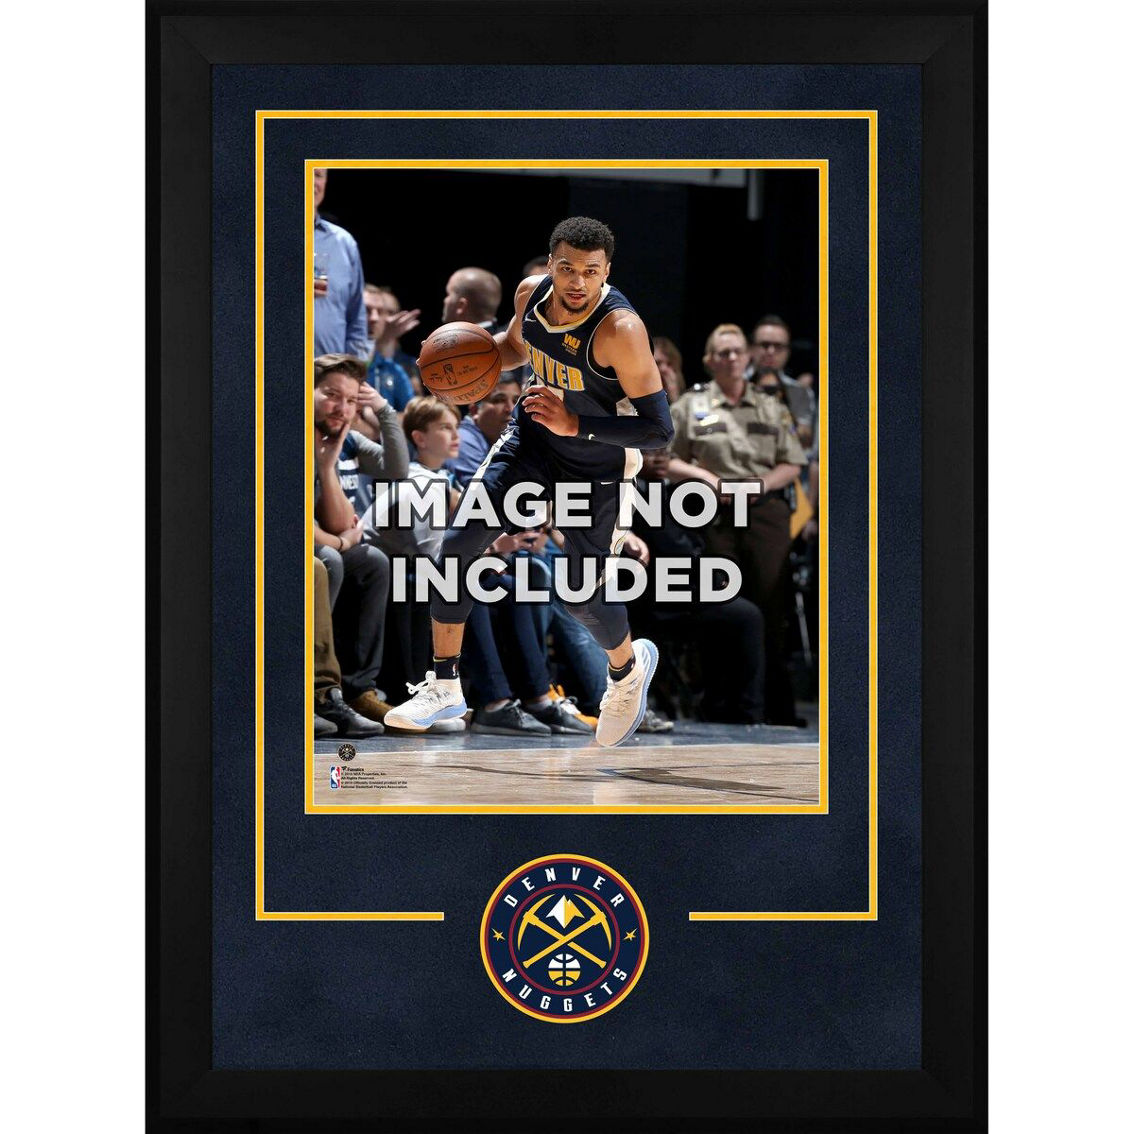 Fanatics Authentic Denver Nuggets Deluxe 16'' x 20'' Vertical Frame with Team Logo - Image 2 of 2